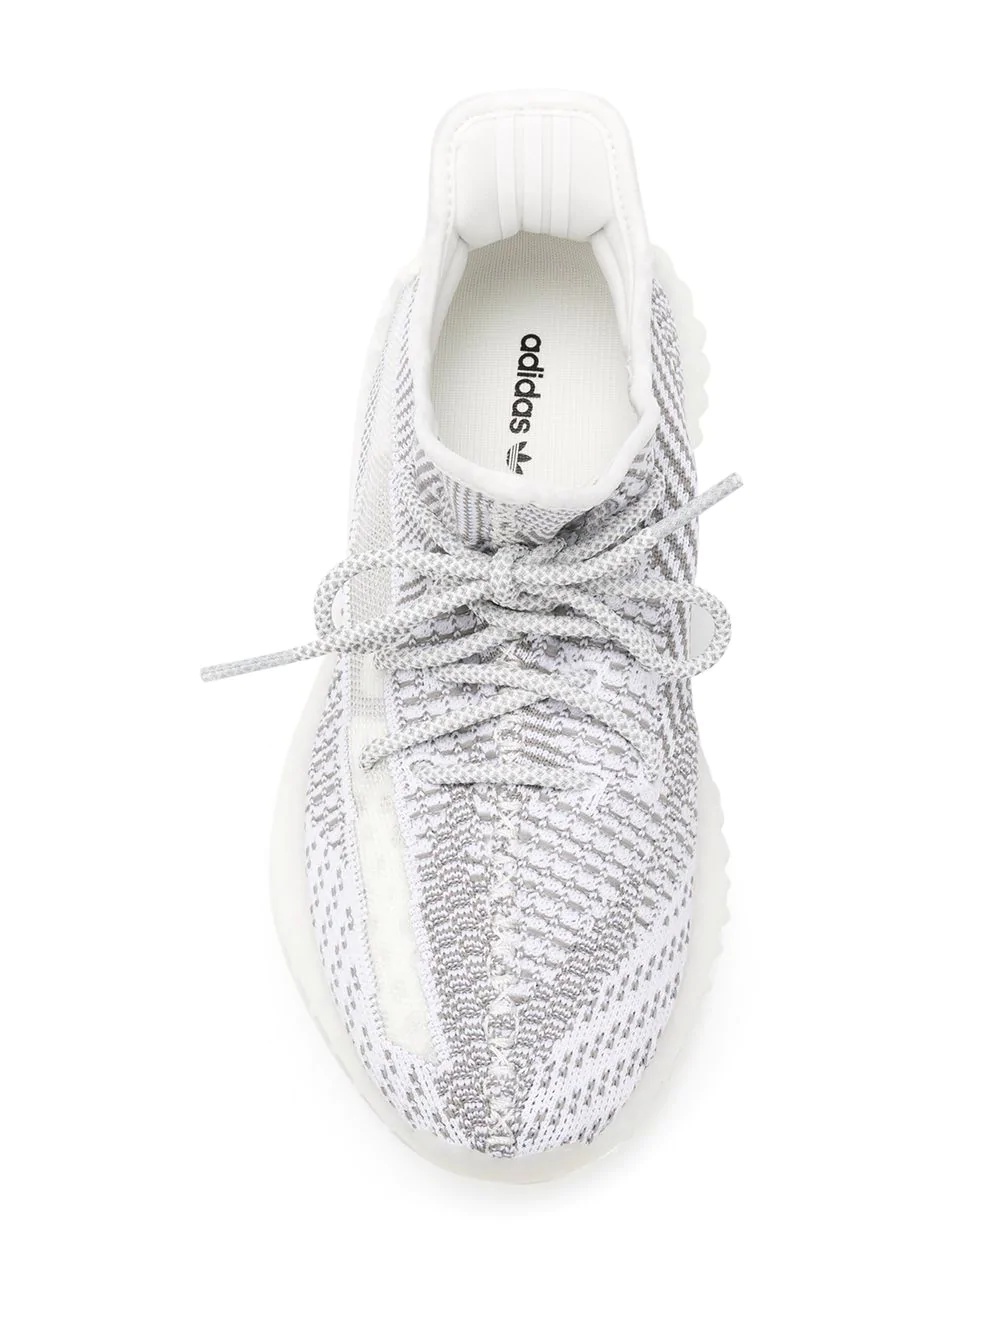 Yeezy Boost 350 V2 "Static" sneakers - 4